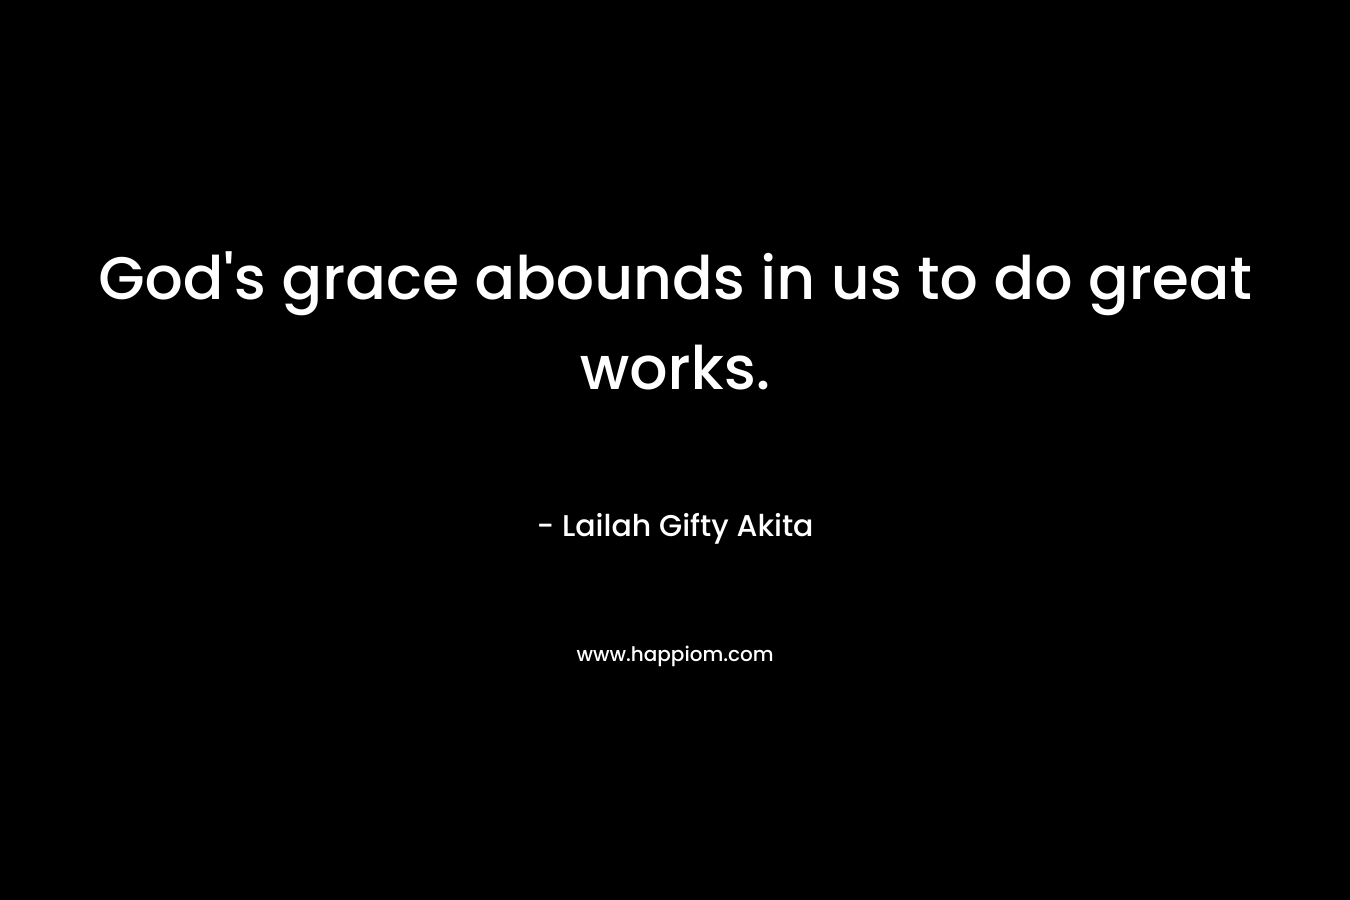 God’s grace abounds in us to do great works. – Lailah Gifty Akita